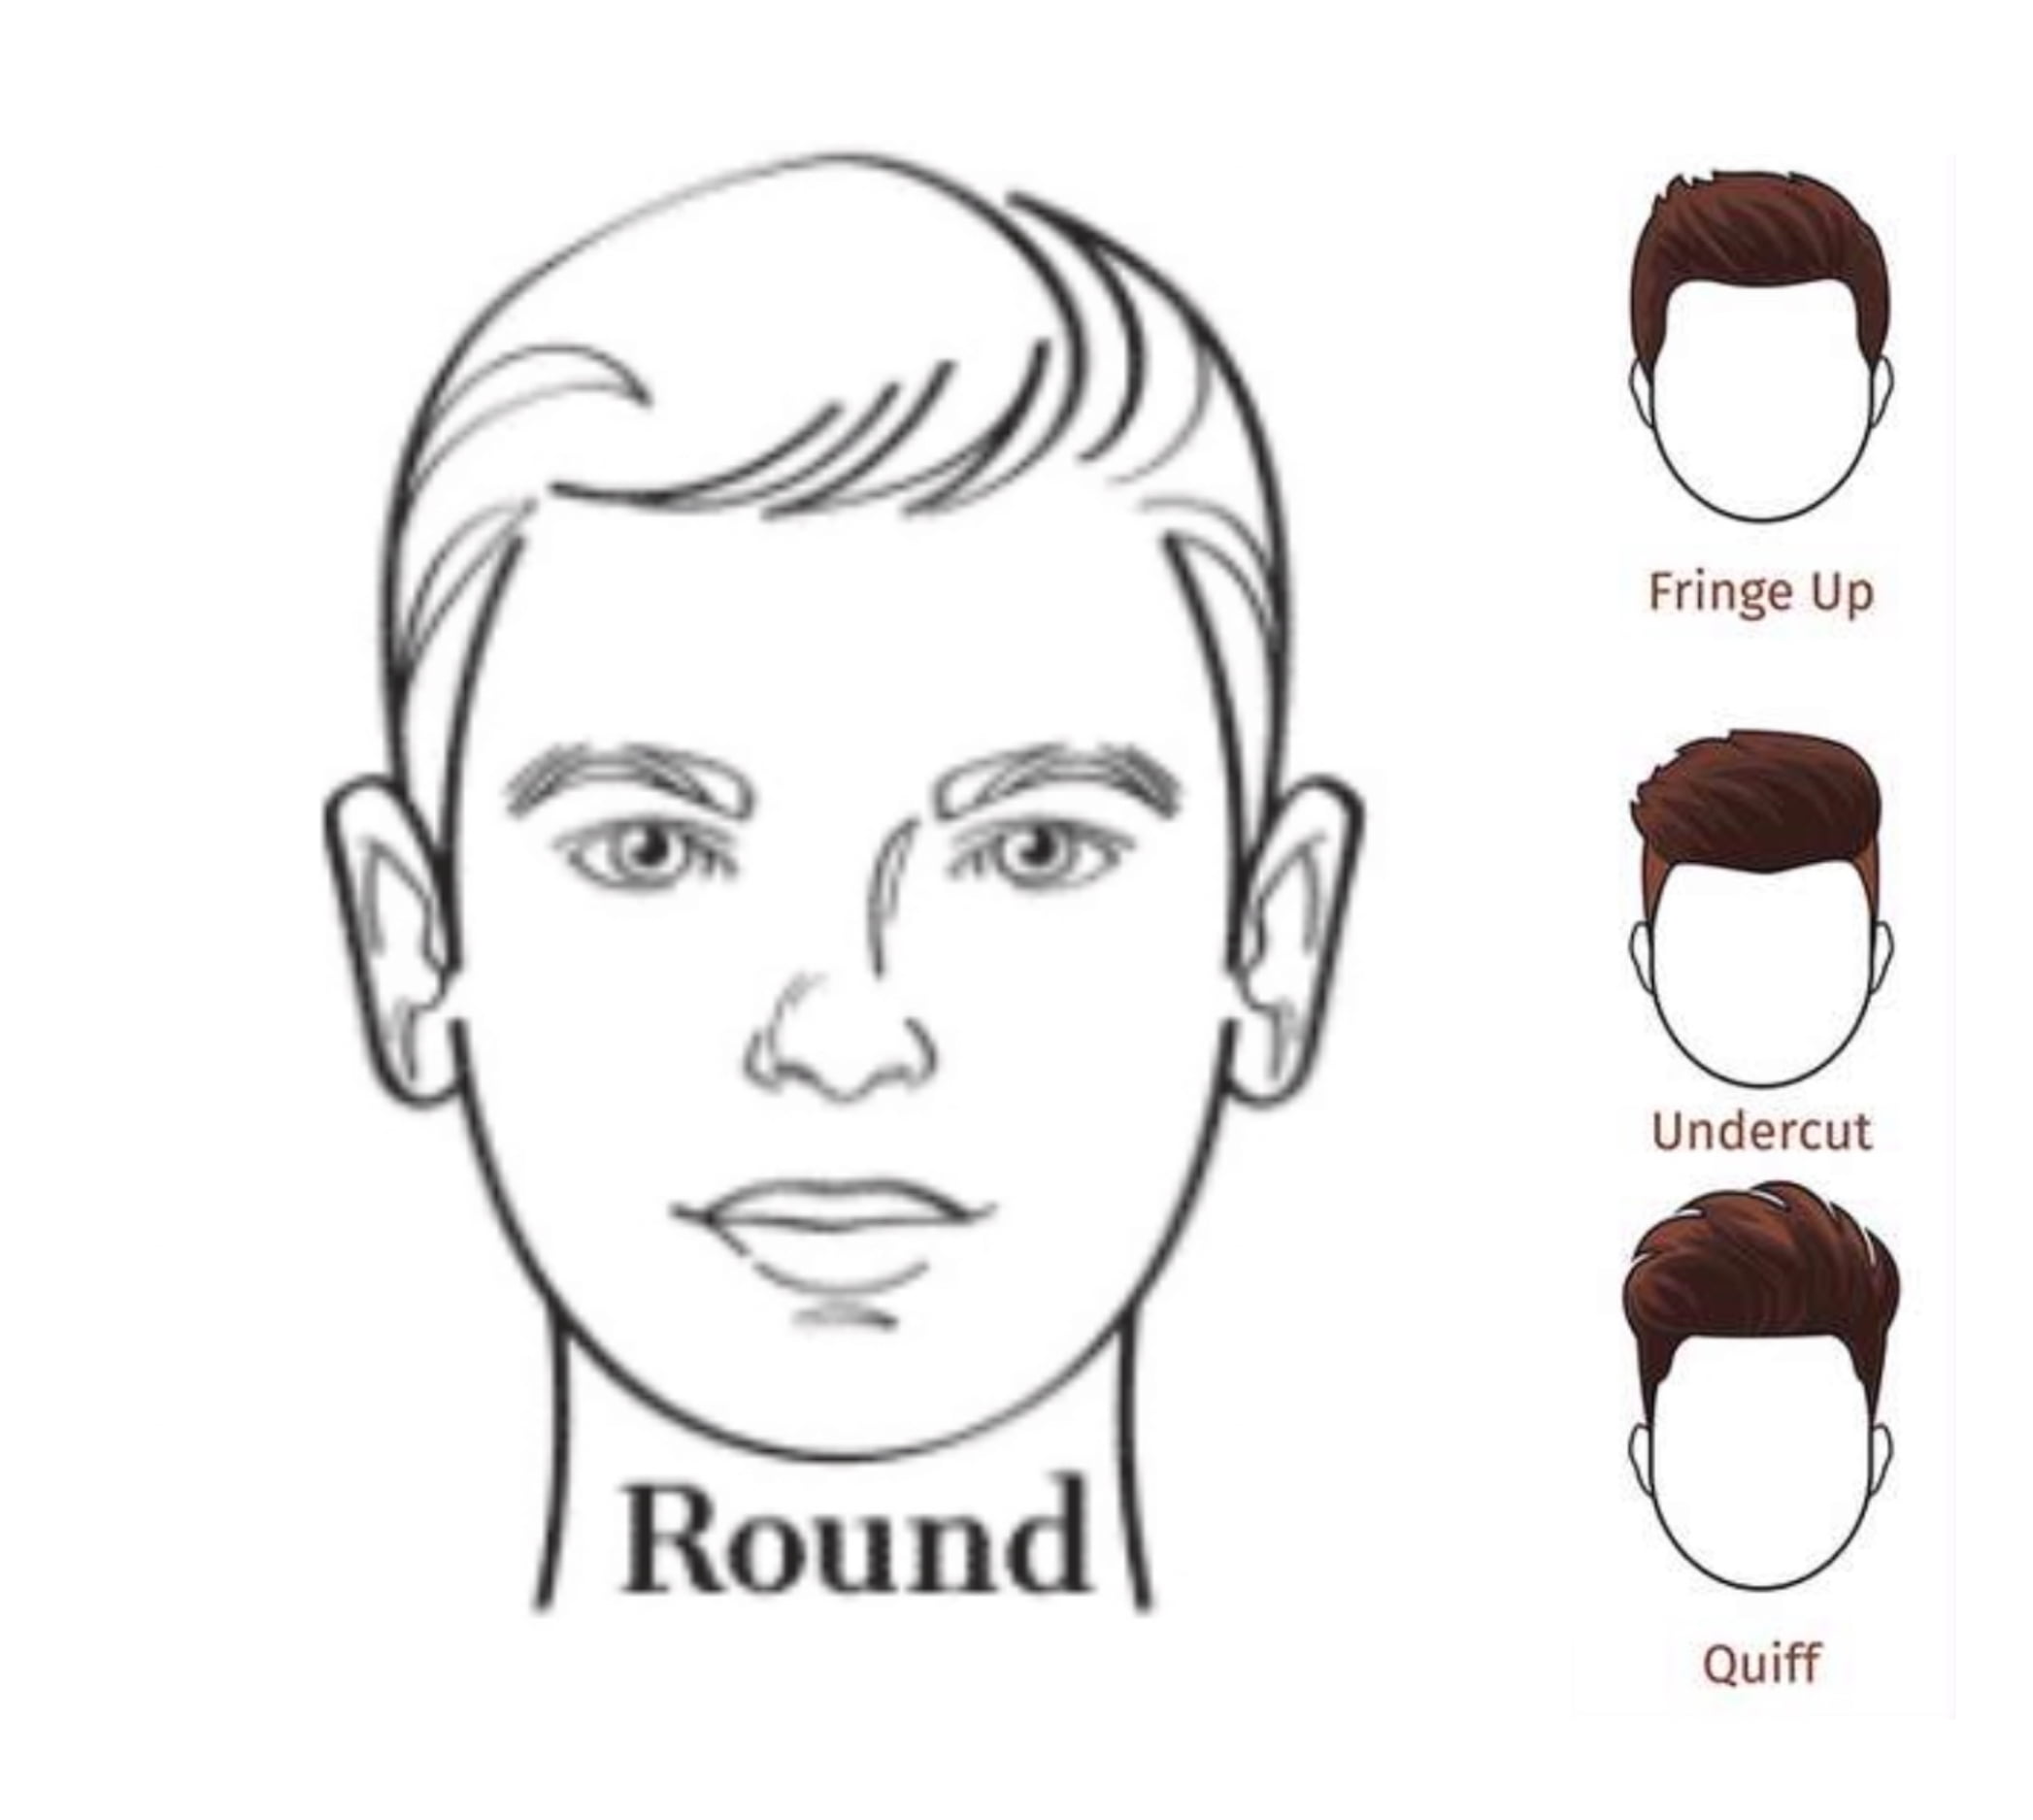 Haircut Styles According To Face Shapes